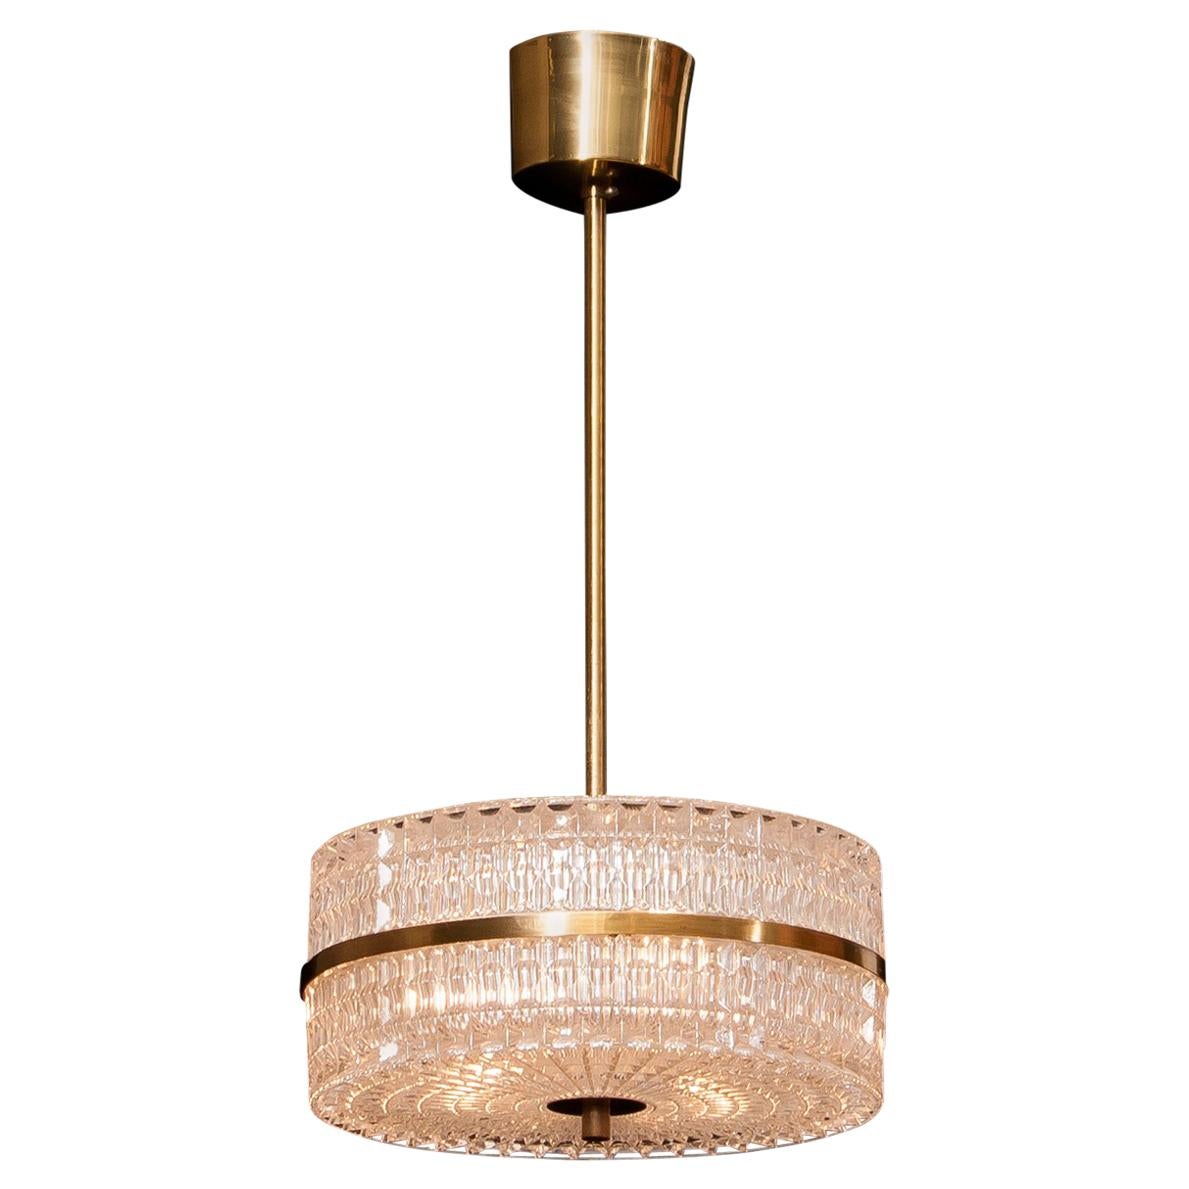 Beautiful ceiling lamp designed by Carl Fagerlund for Orrefors, Sweden.
The crystal glass with the brass details makes it a very nice combination.
It is in a wonderful working condition.
Period 1960s.
Dimensions: H 50 cm, ø 26 cm.